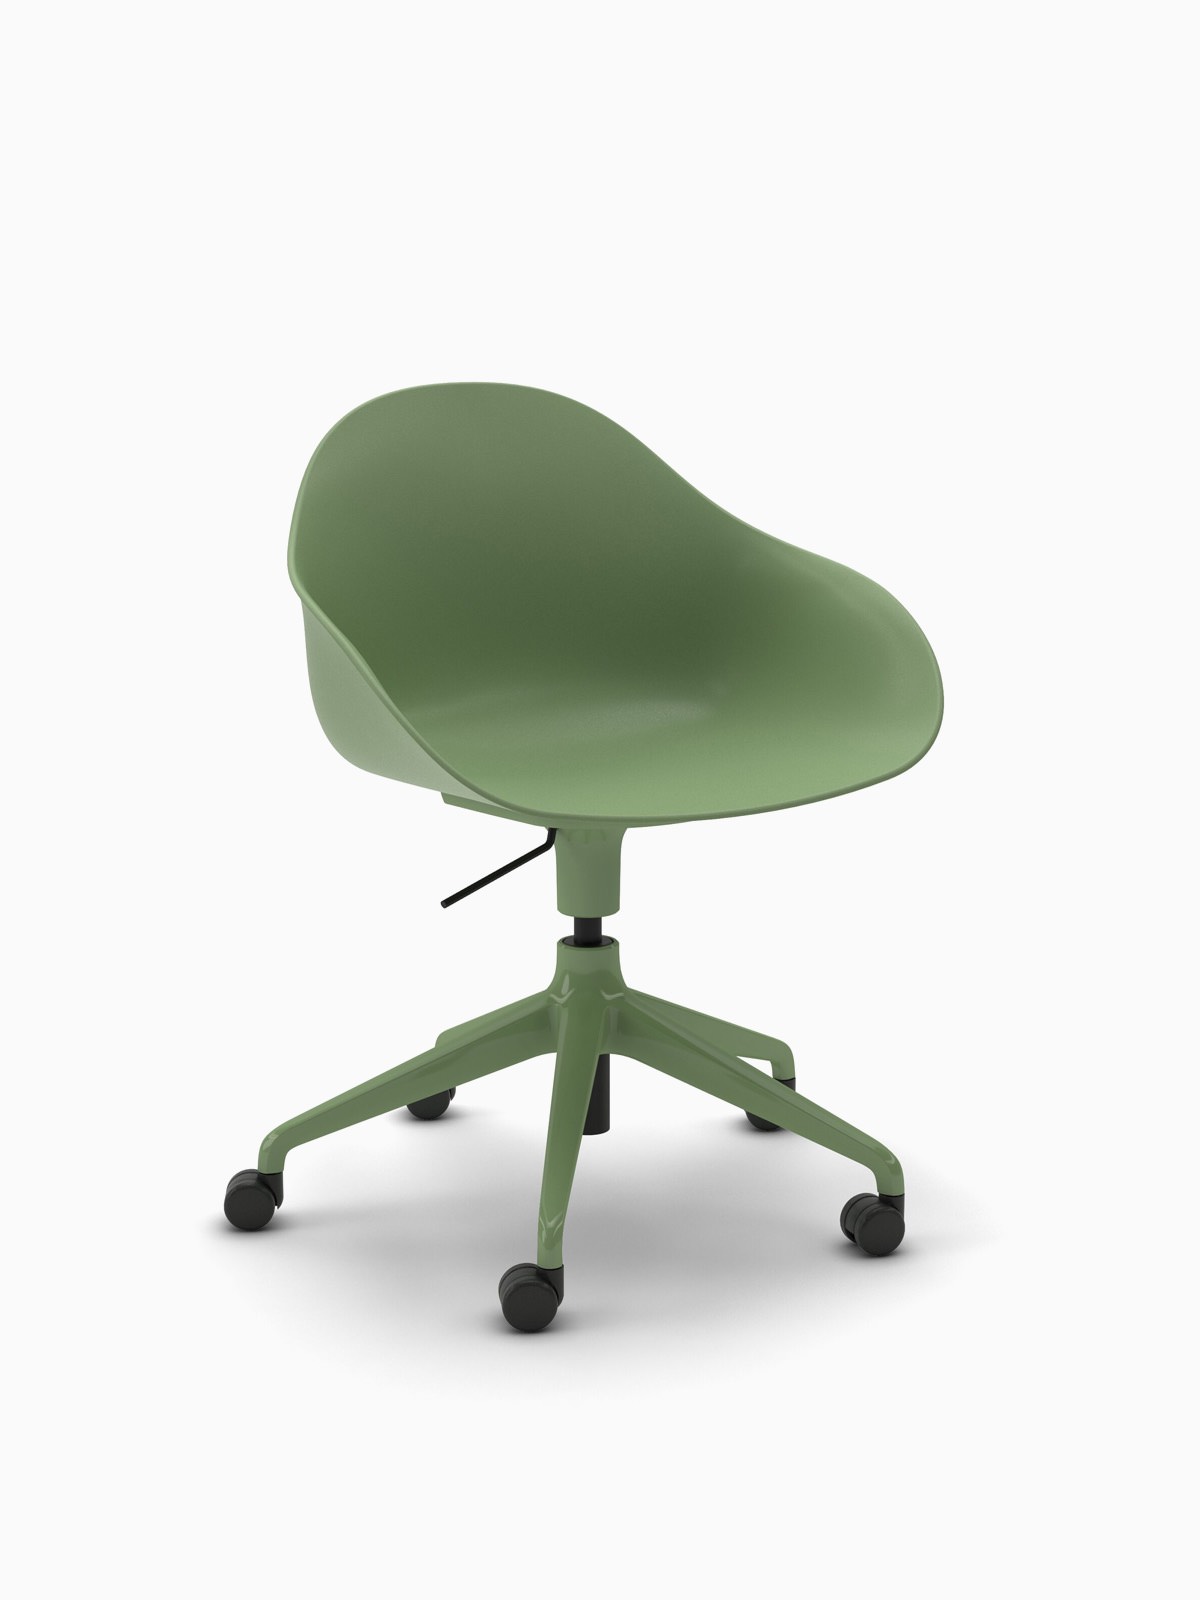 https://www.hermanmiller.com/content/dam/hmicom/page_assets/products/naughtone/ruby_chair/th_prd_ruby_chair_office_chairs_seating_fn.jpg